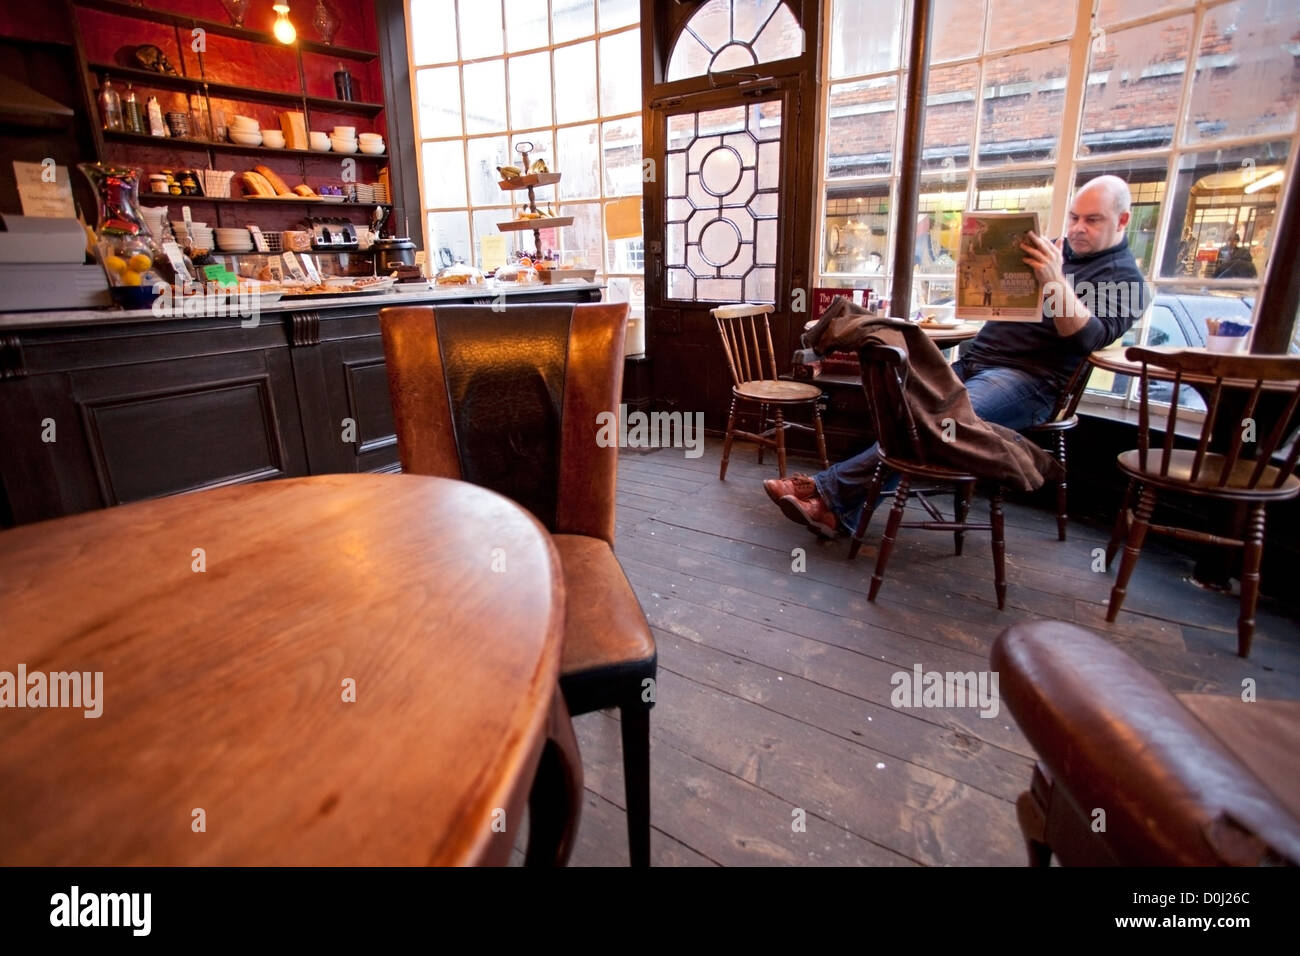 A man relaxes in the Apothecary cafe in Rye. Stock Photo